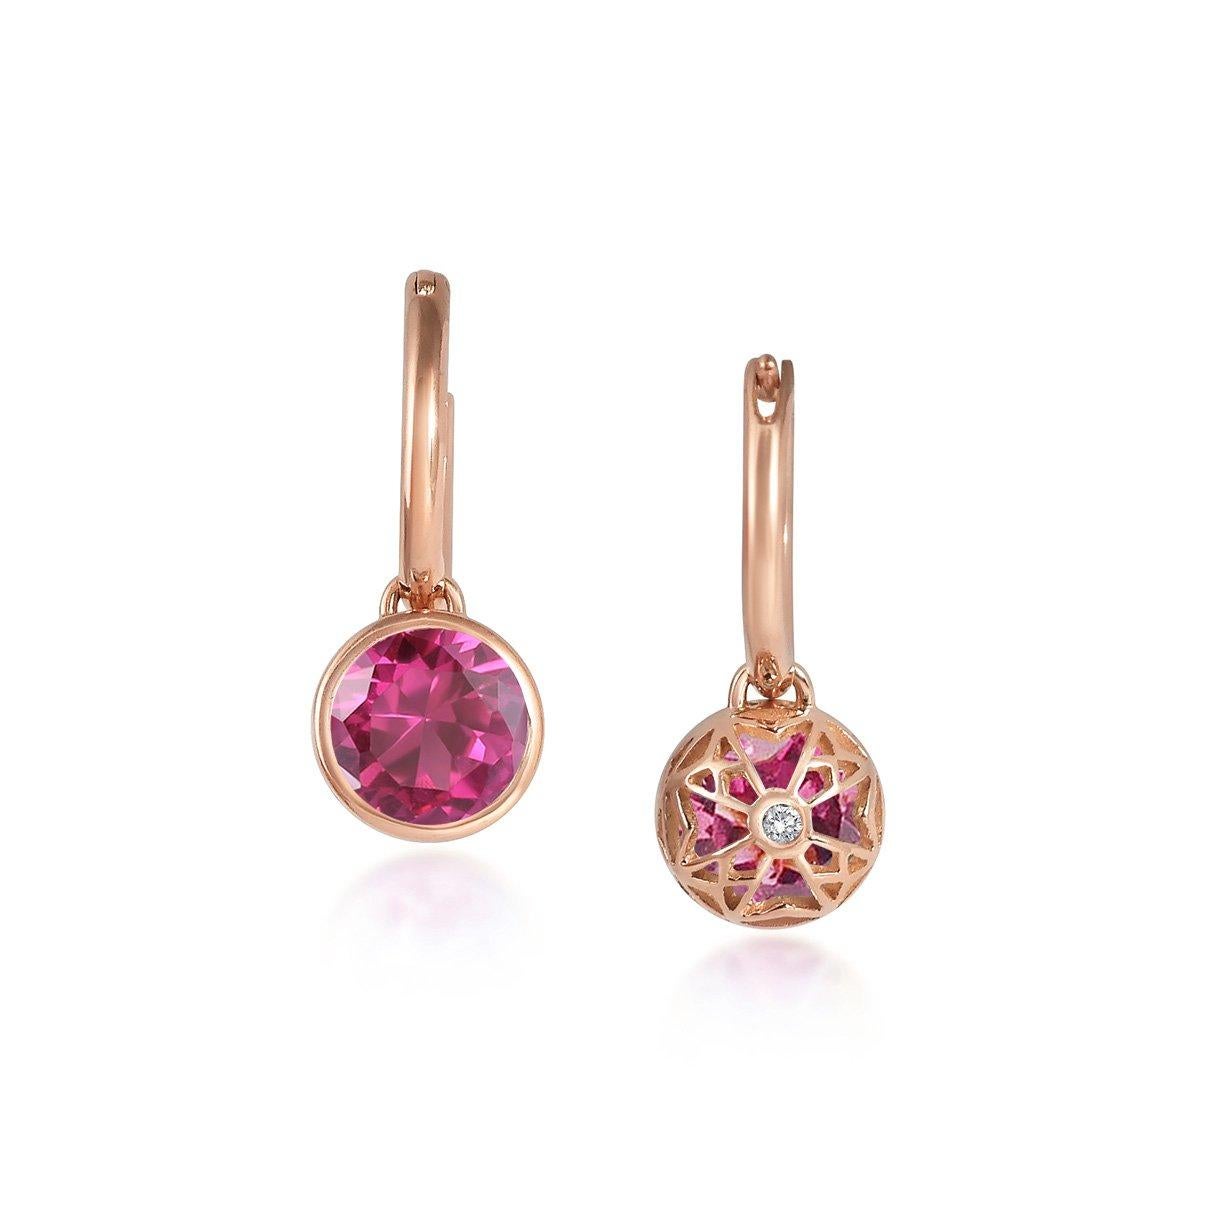 Contemporary Handcrafted 2.60 Carats Pink Tourmaline 18 Karat Rose Gold Drop Earrings For Sale